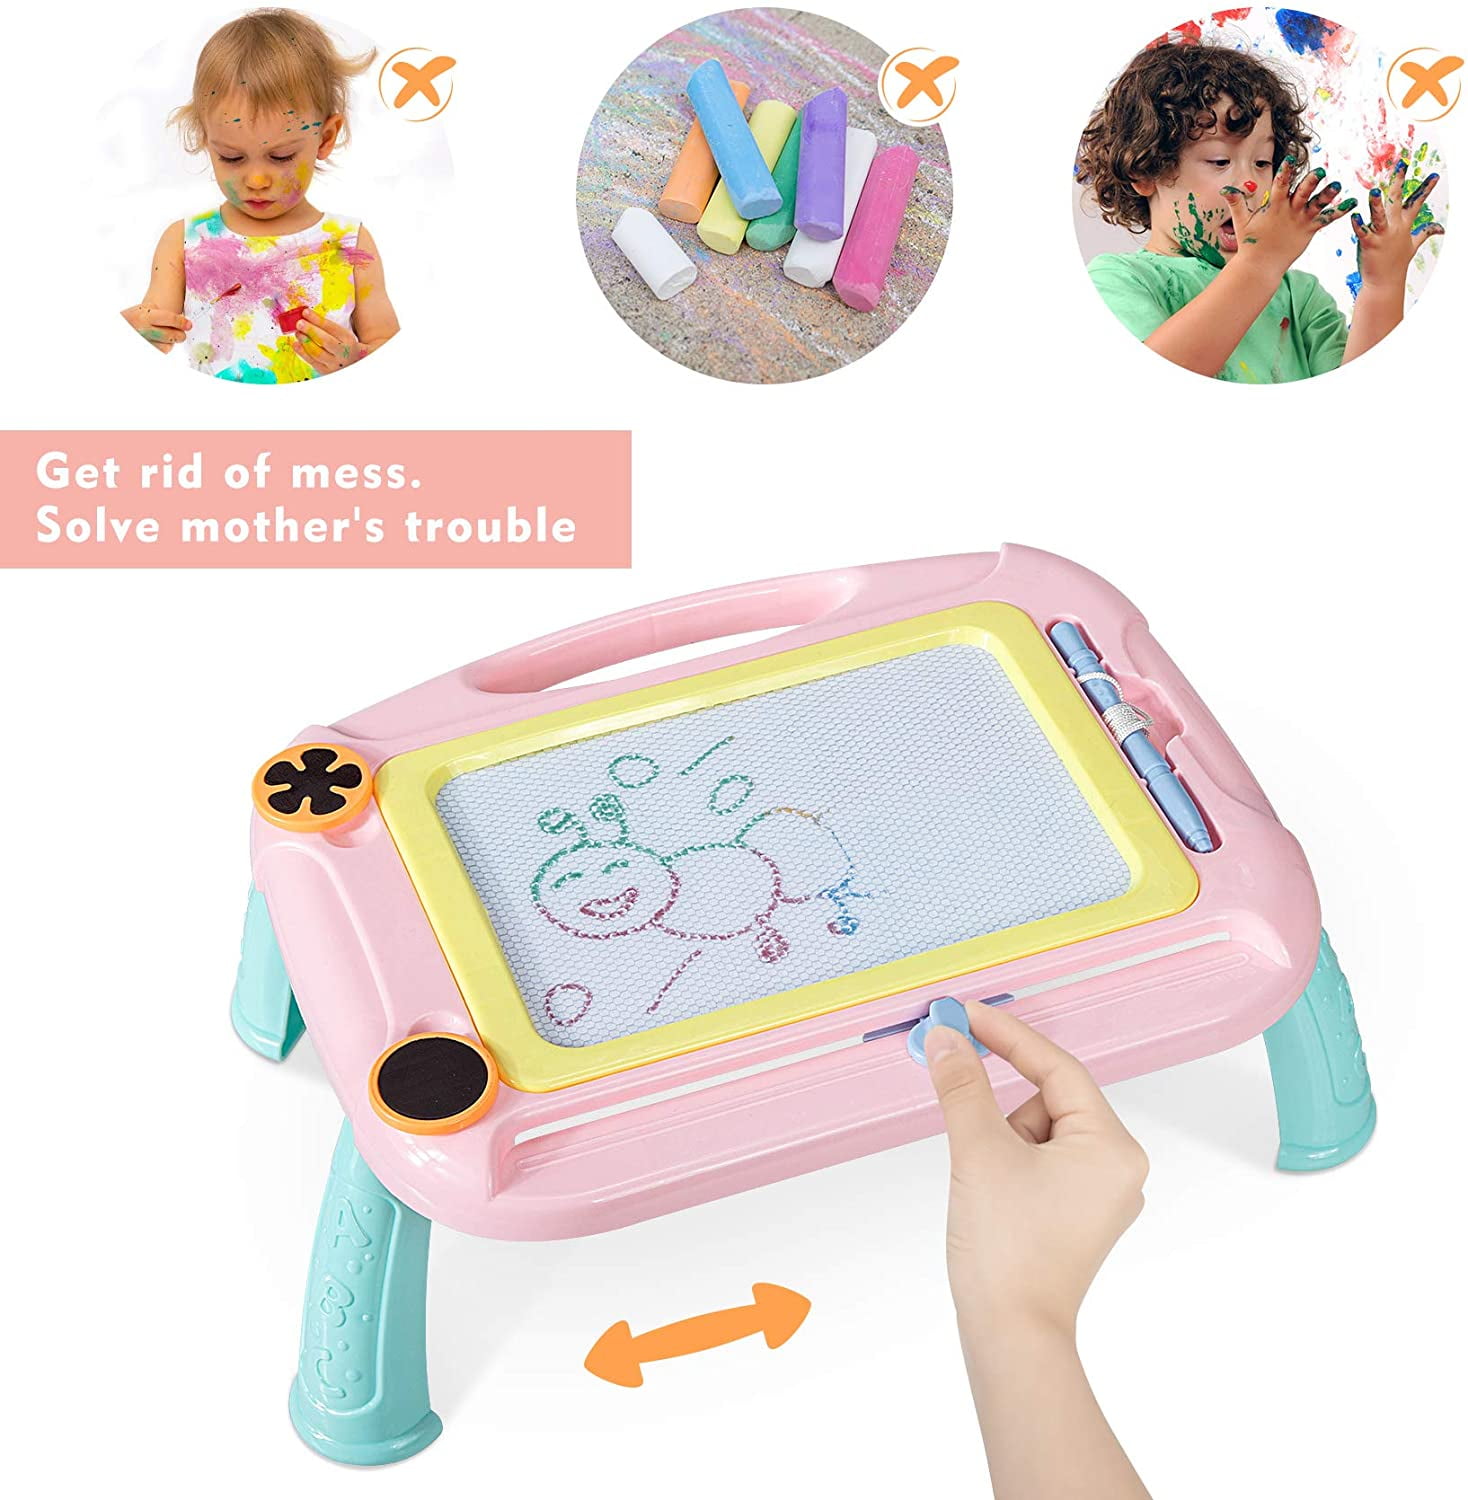 JYC 4Color Water Drawing Mat Board & Magic Pen Doodle On Sale.Clearance Kids Toy Gift 46X30cm